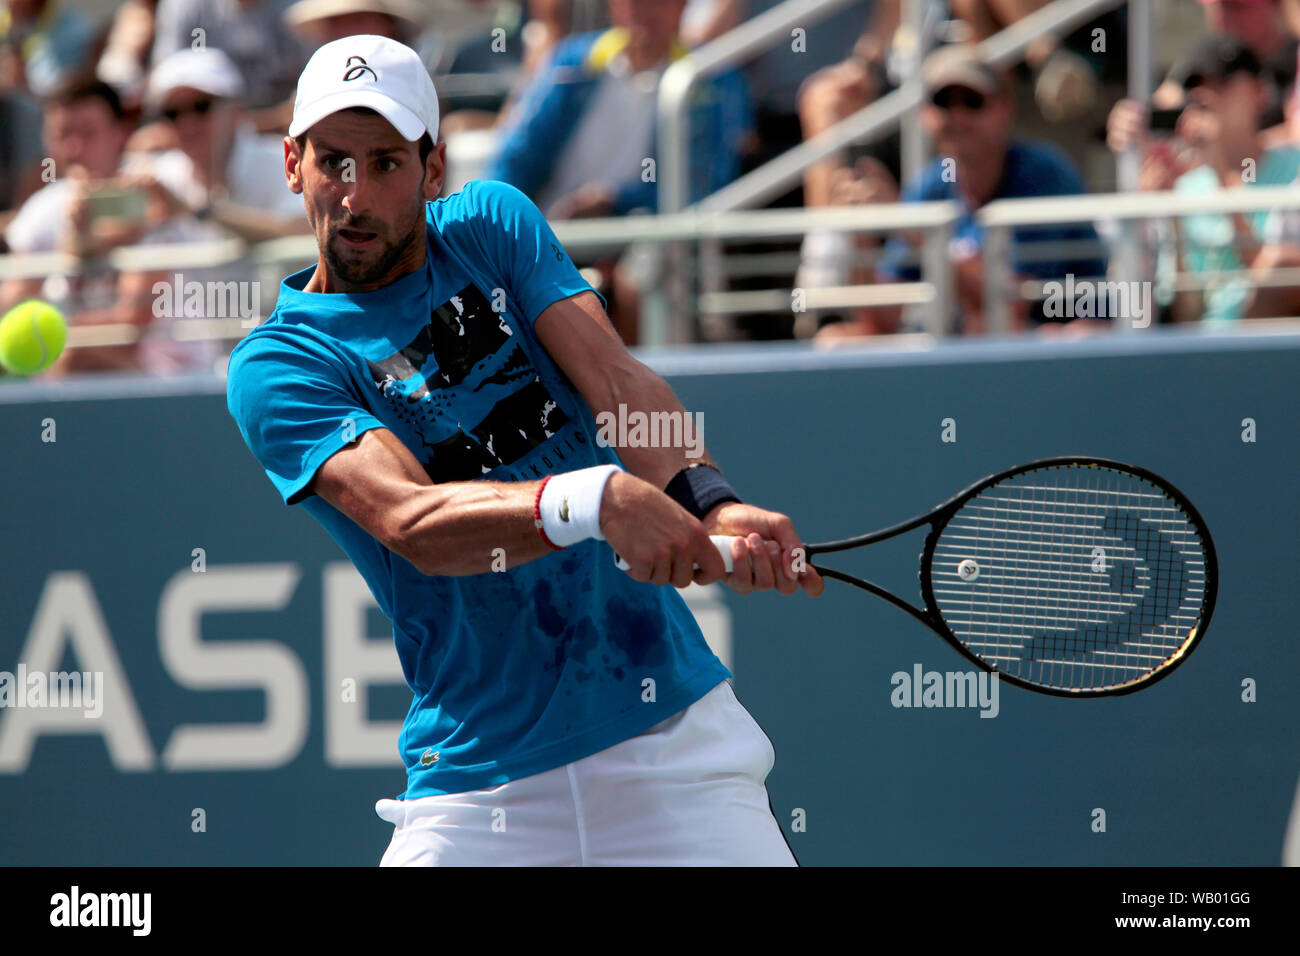 Flushing Meadows, New York, United States - 21 August 2019. Novak Djokovic of Serbia practicing at the National Tennis Center in Flushing Meadows, New York in preparation for the US Open which begins next Monday. Credit: Adam Stoltman/Alamy Live News Stock Photo